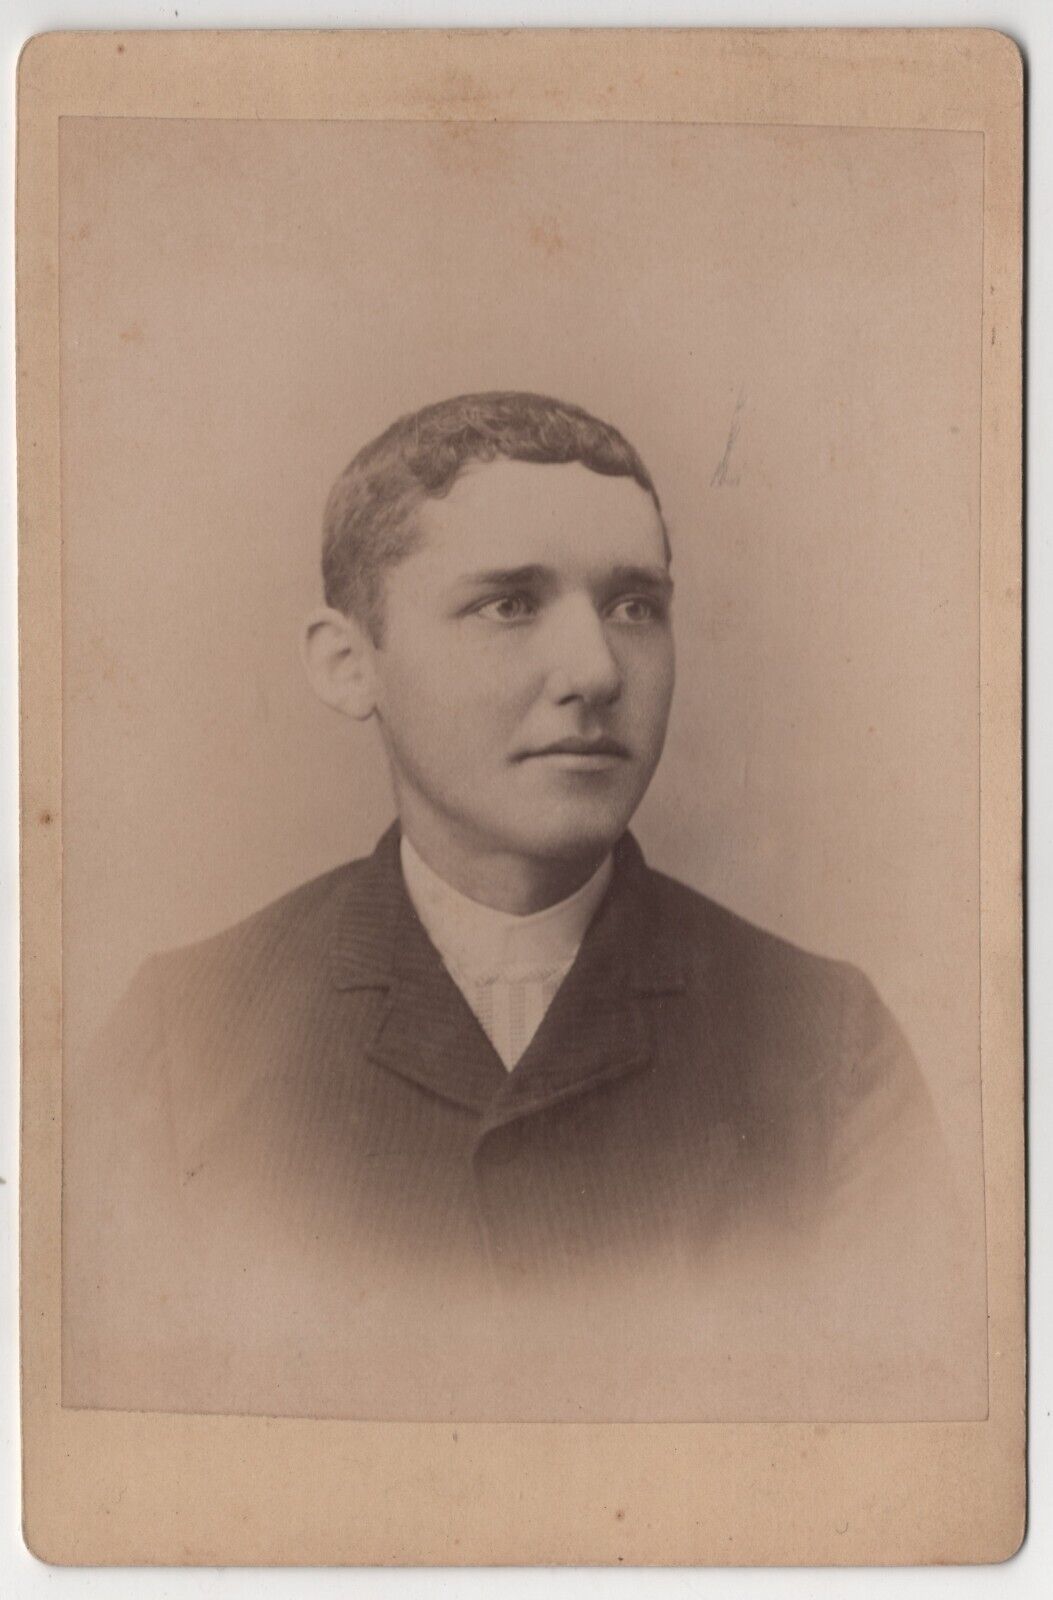 CIRCA 1890s CABINET CARD STEGER HANDSOME YOUNG MAN IN SUIT FINDLAY OHIO